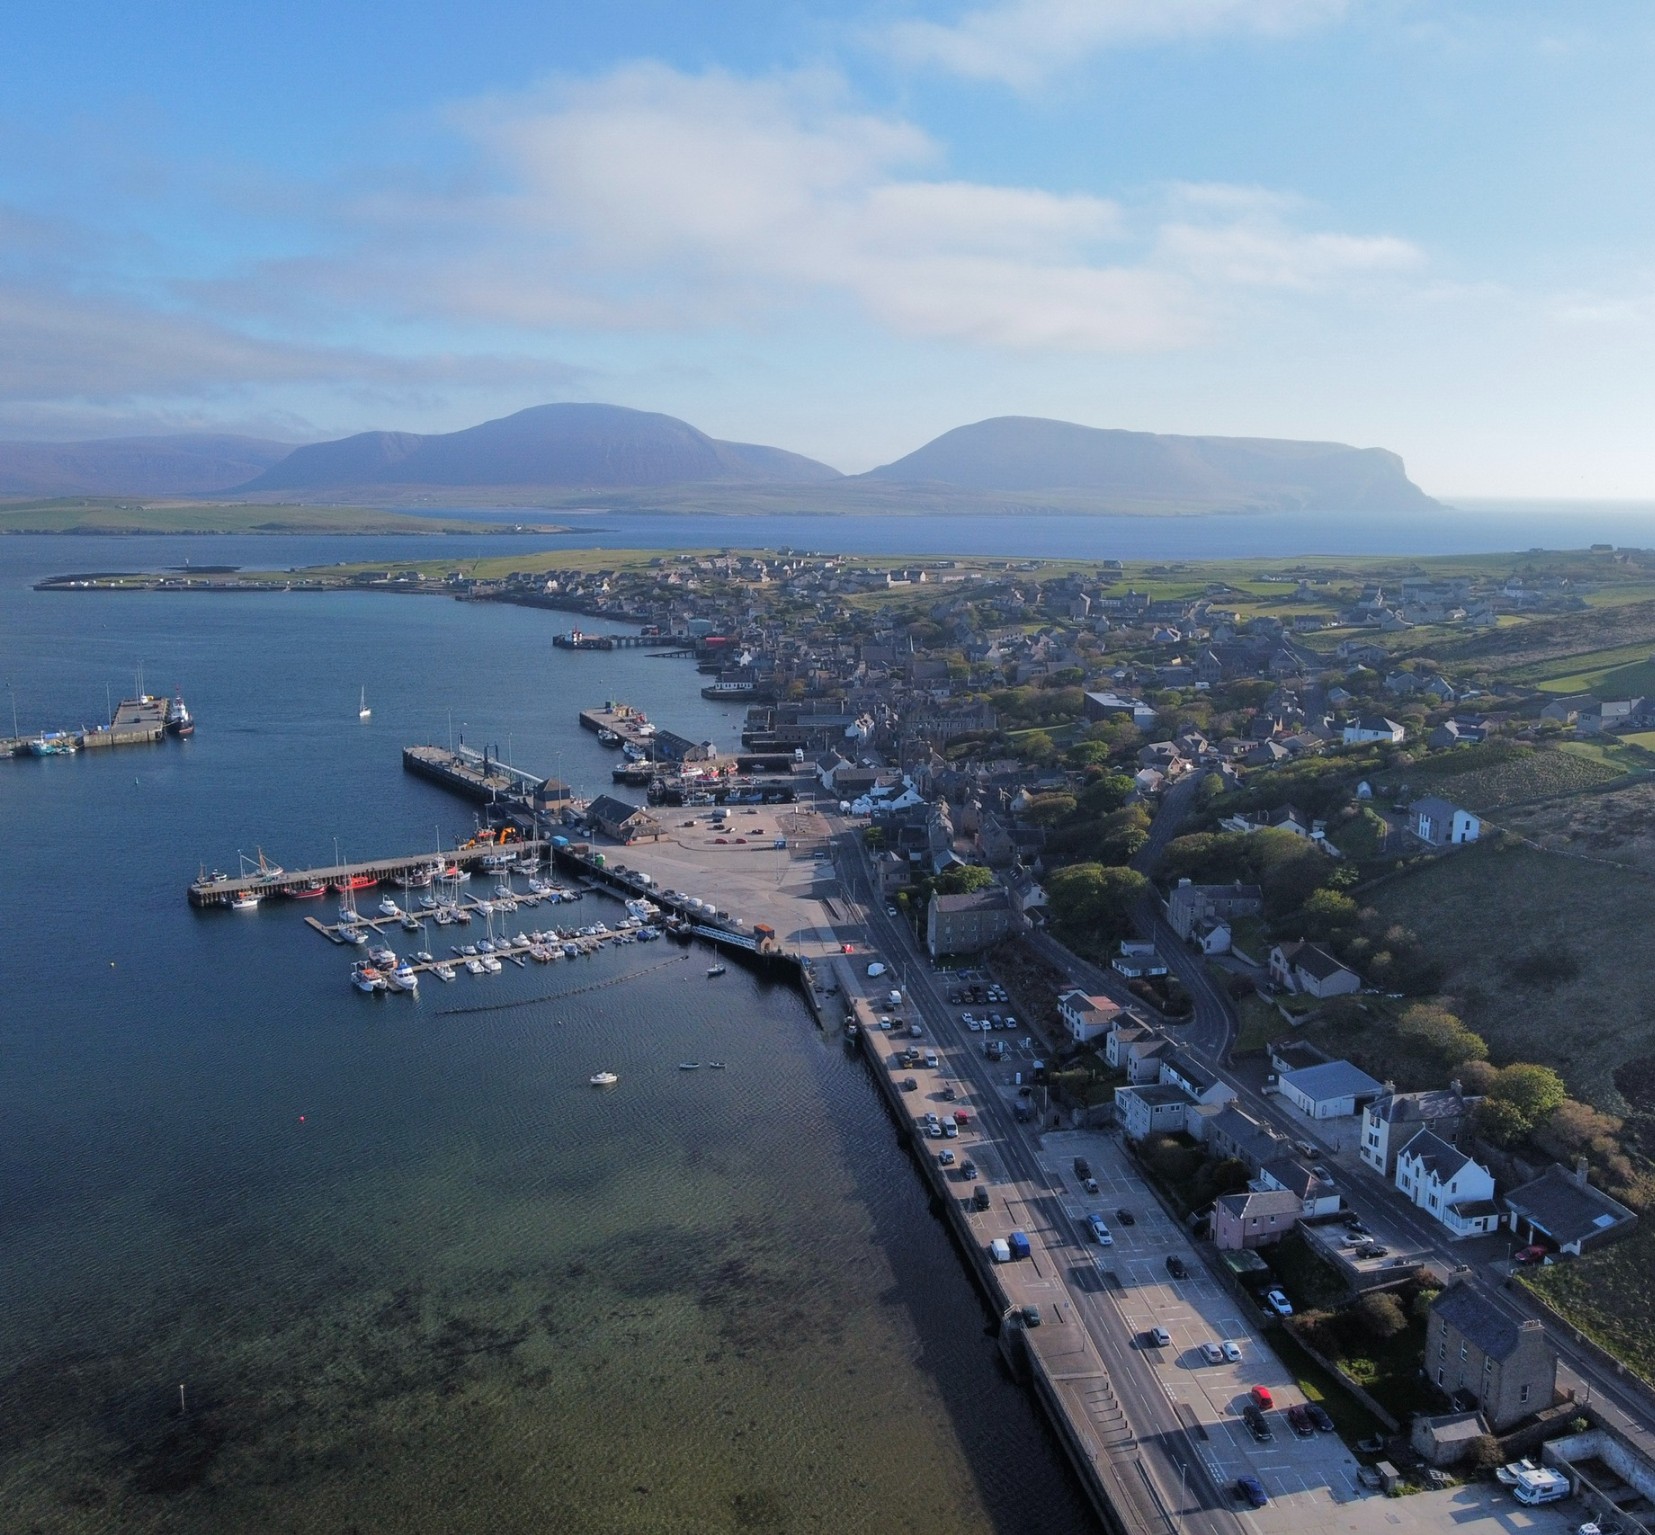 View over Stromness, Orkney - image by Laura Cogle